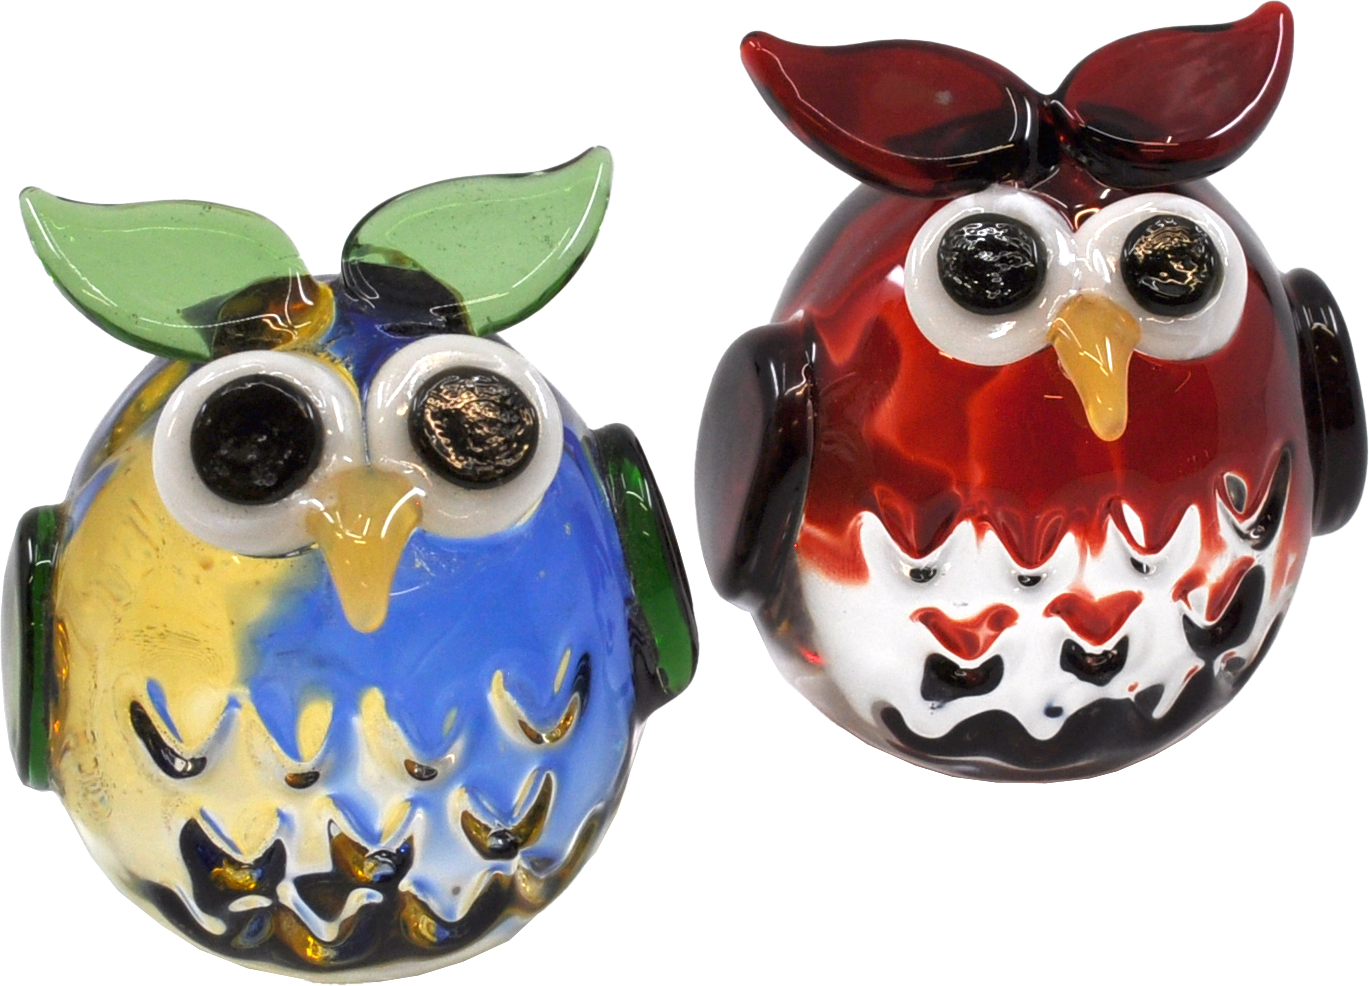 Crystal Castle Blown Glass Owl Figurines. Both Colors available, Red and Green